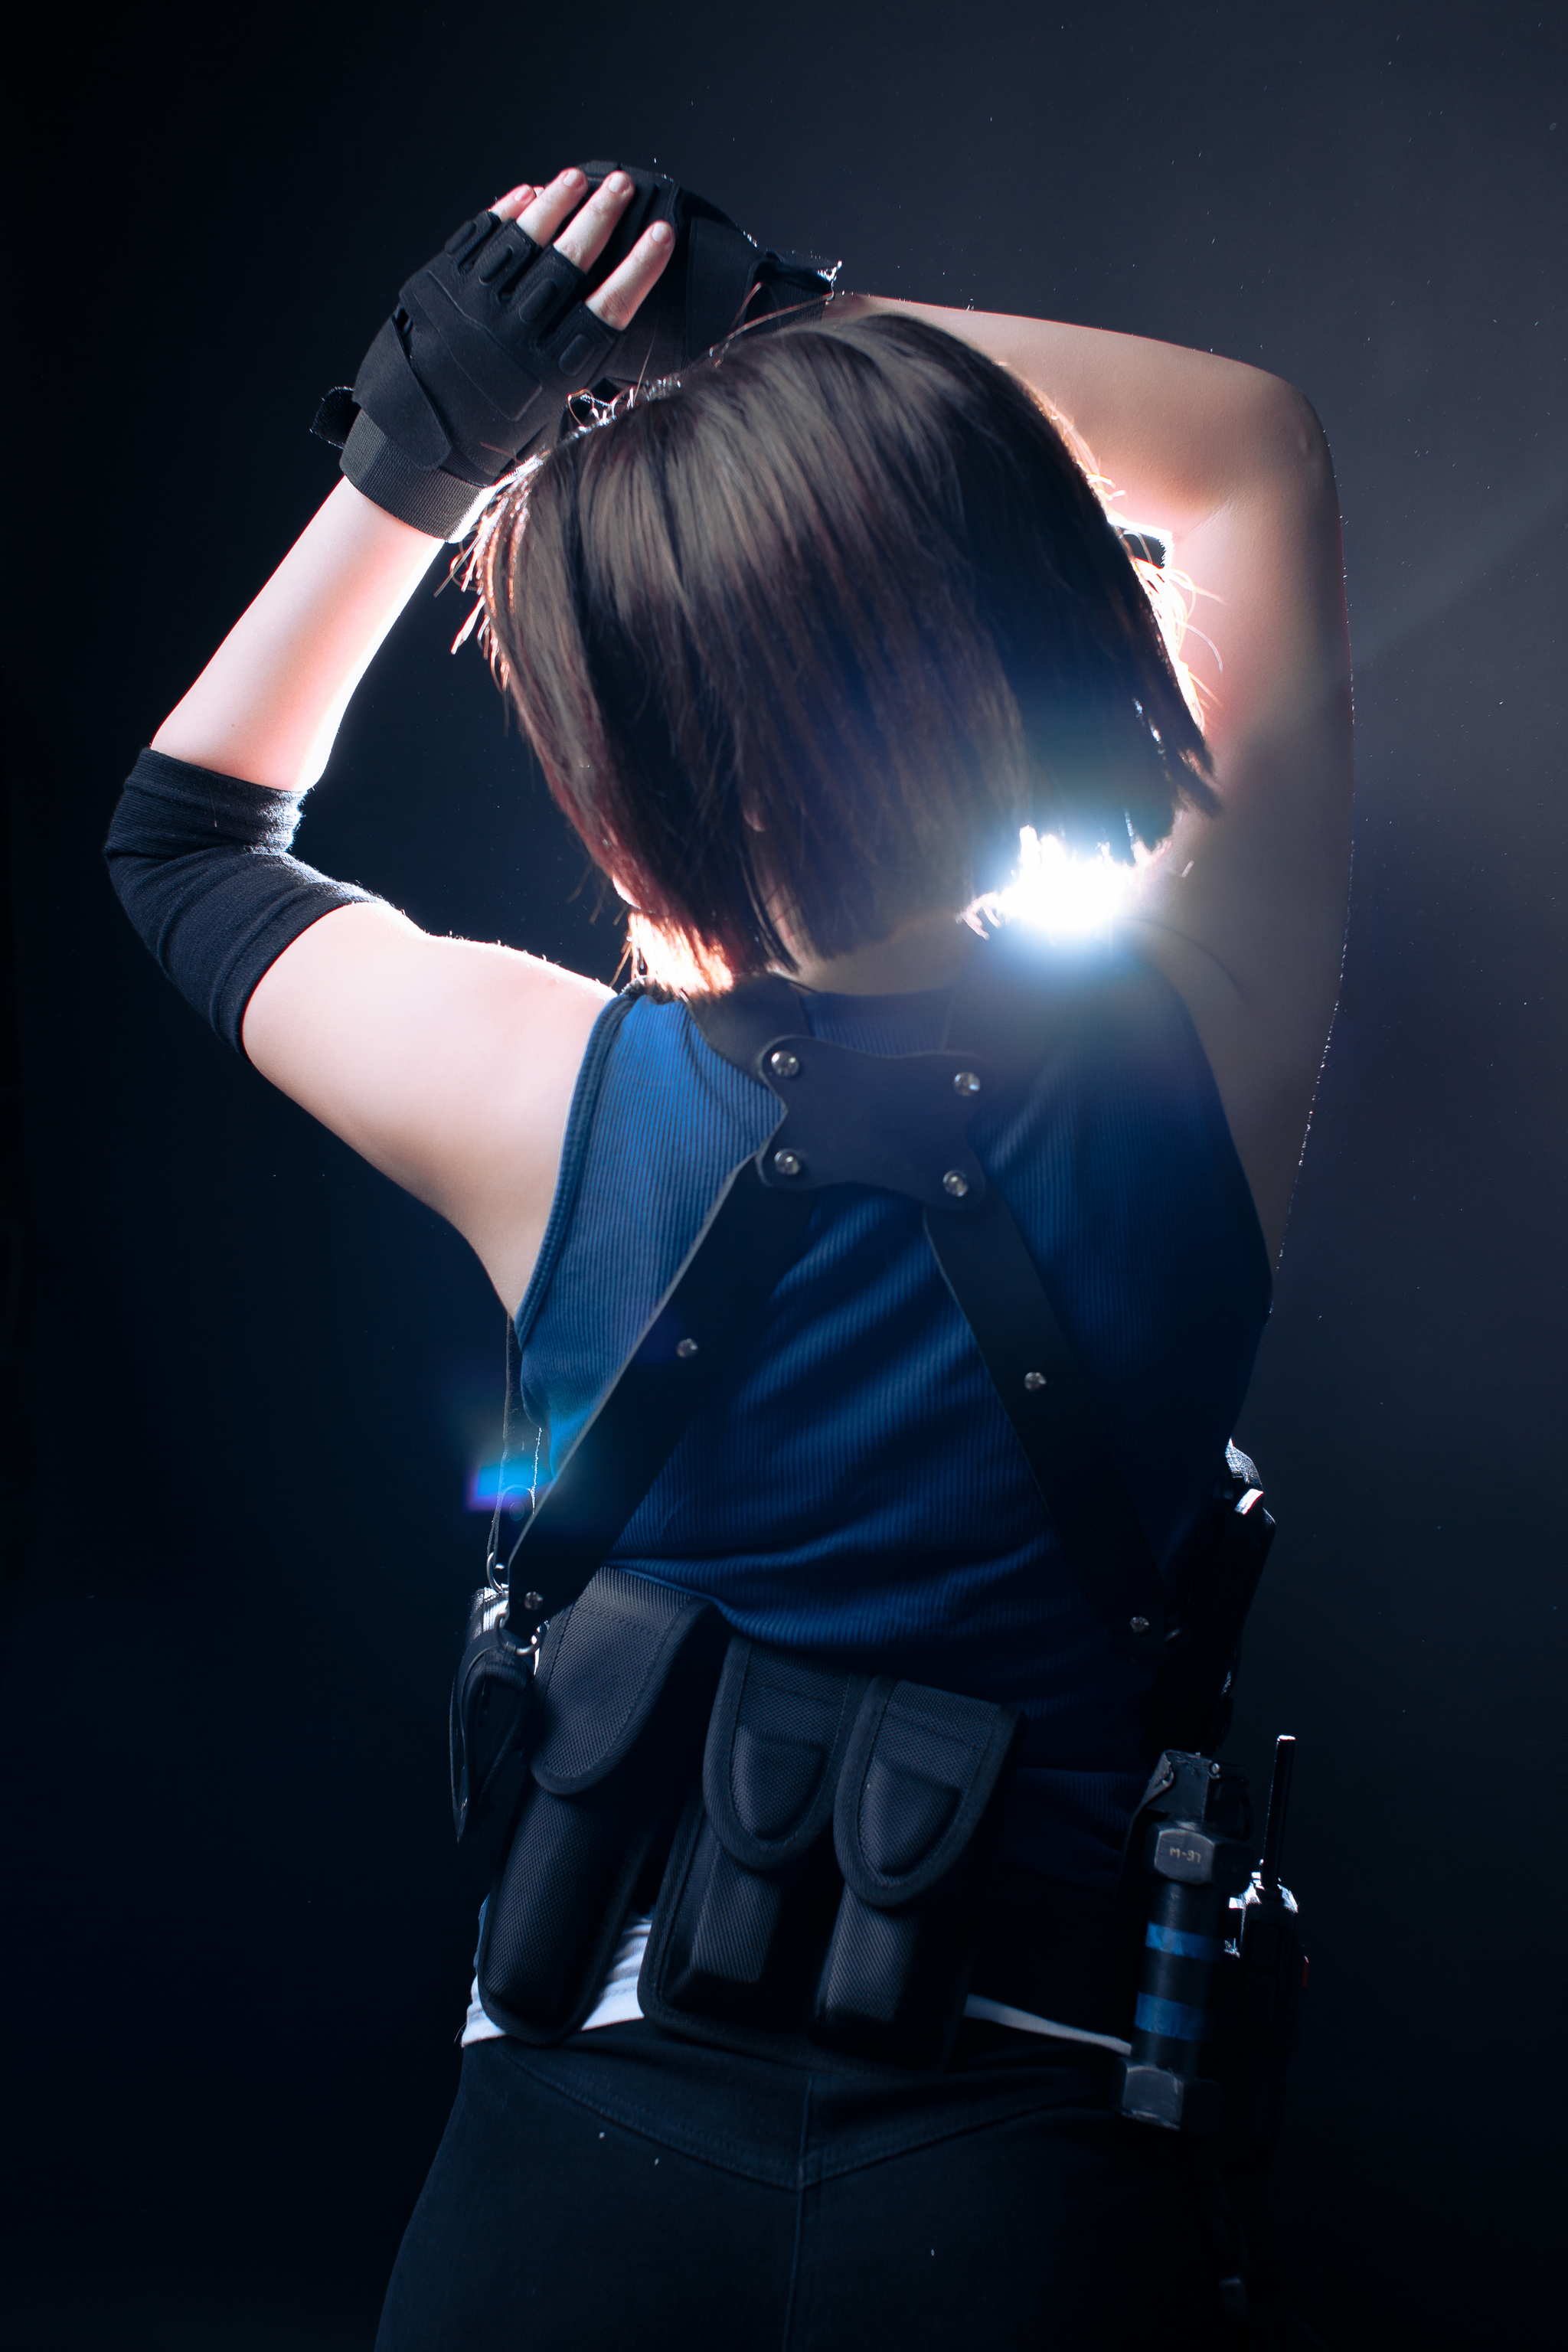 Jill Valentine from Resident Evil 3 - The ART of COSPLAY